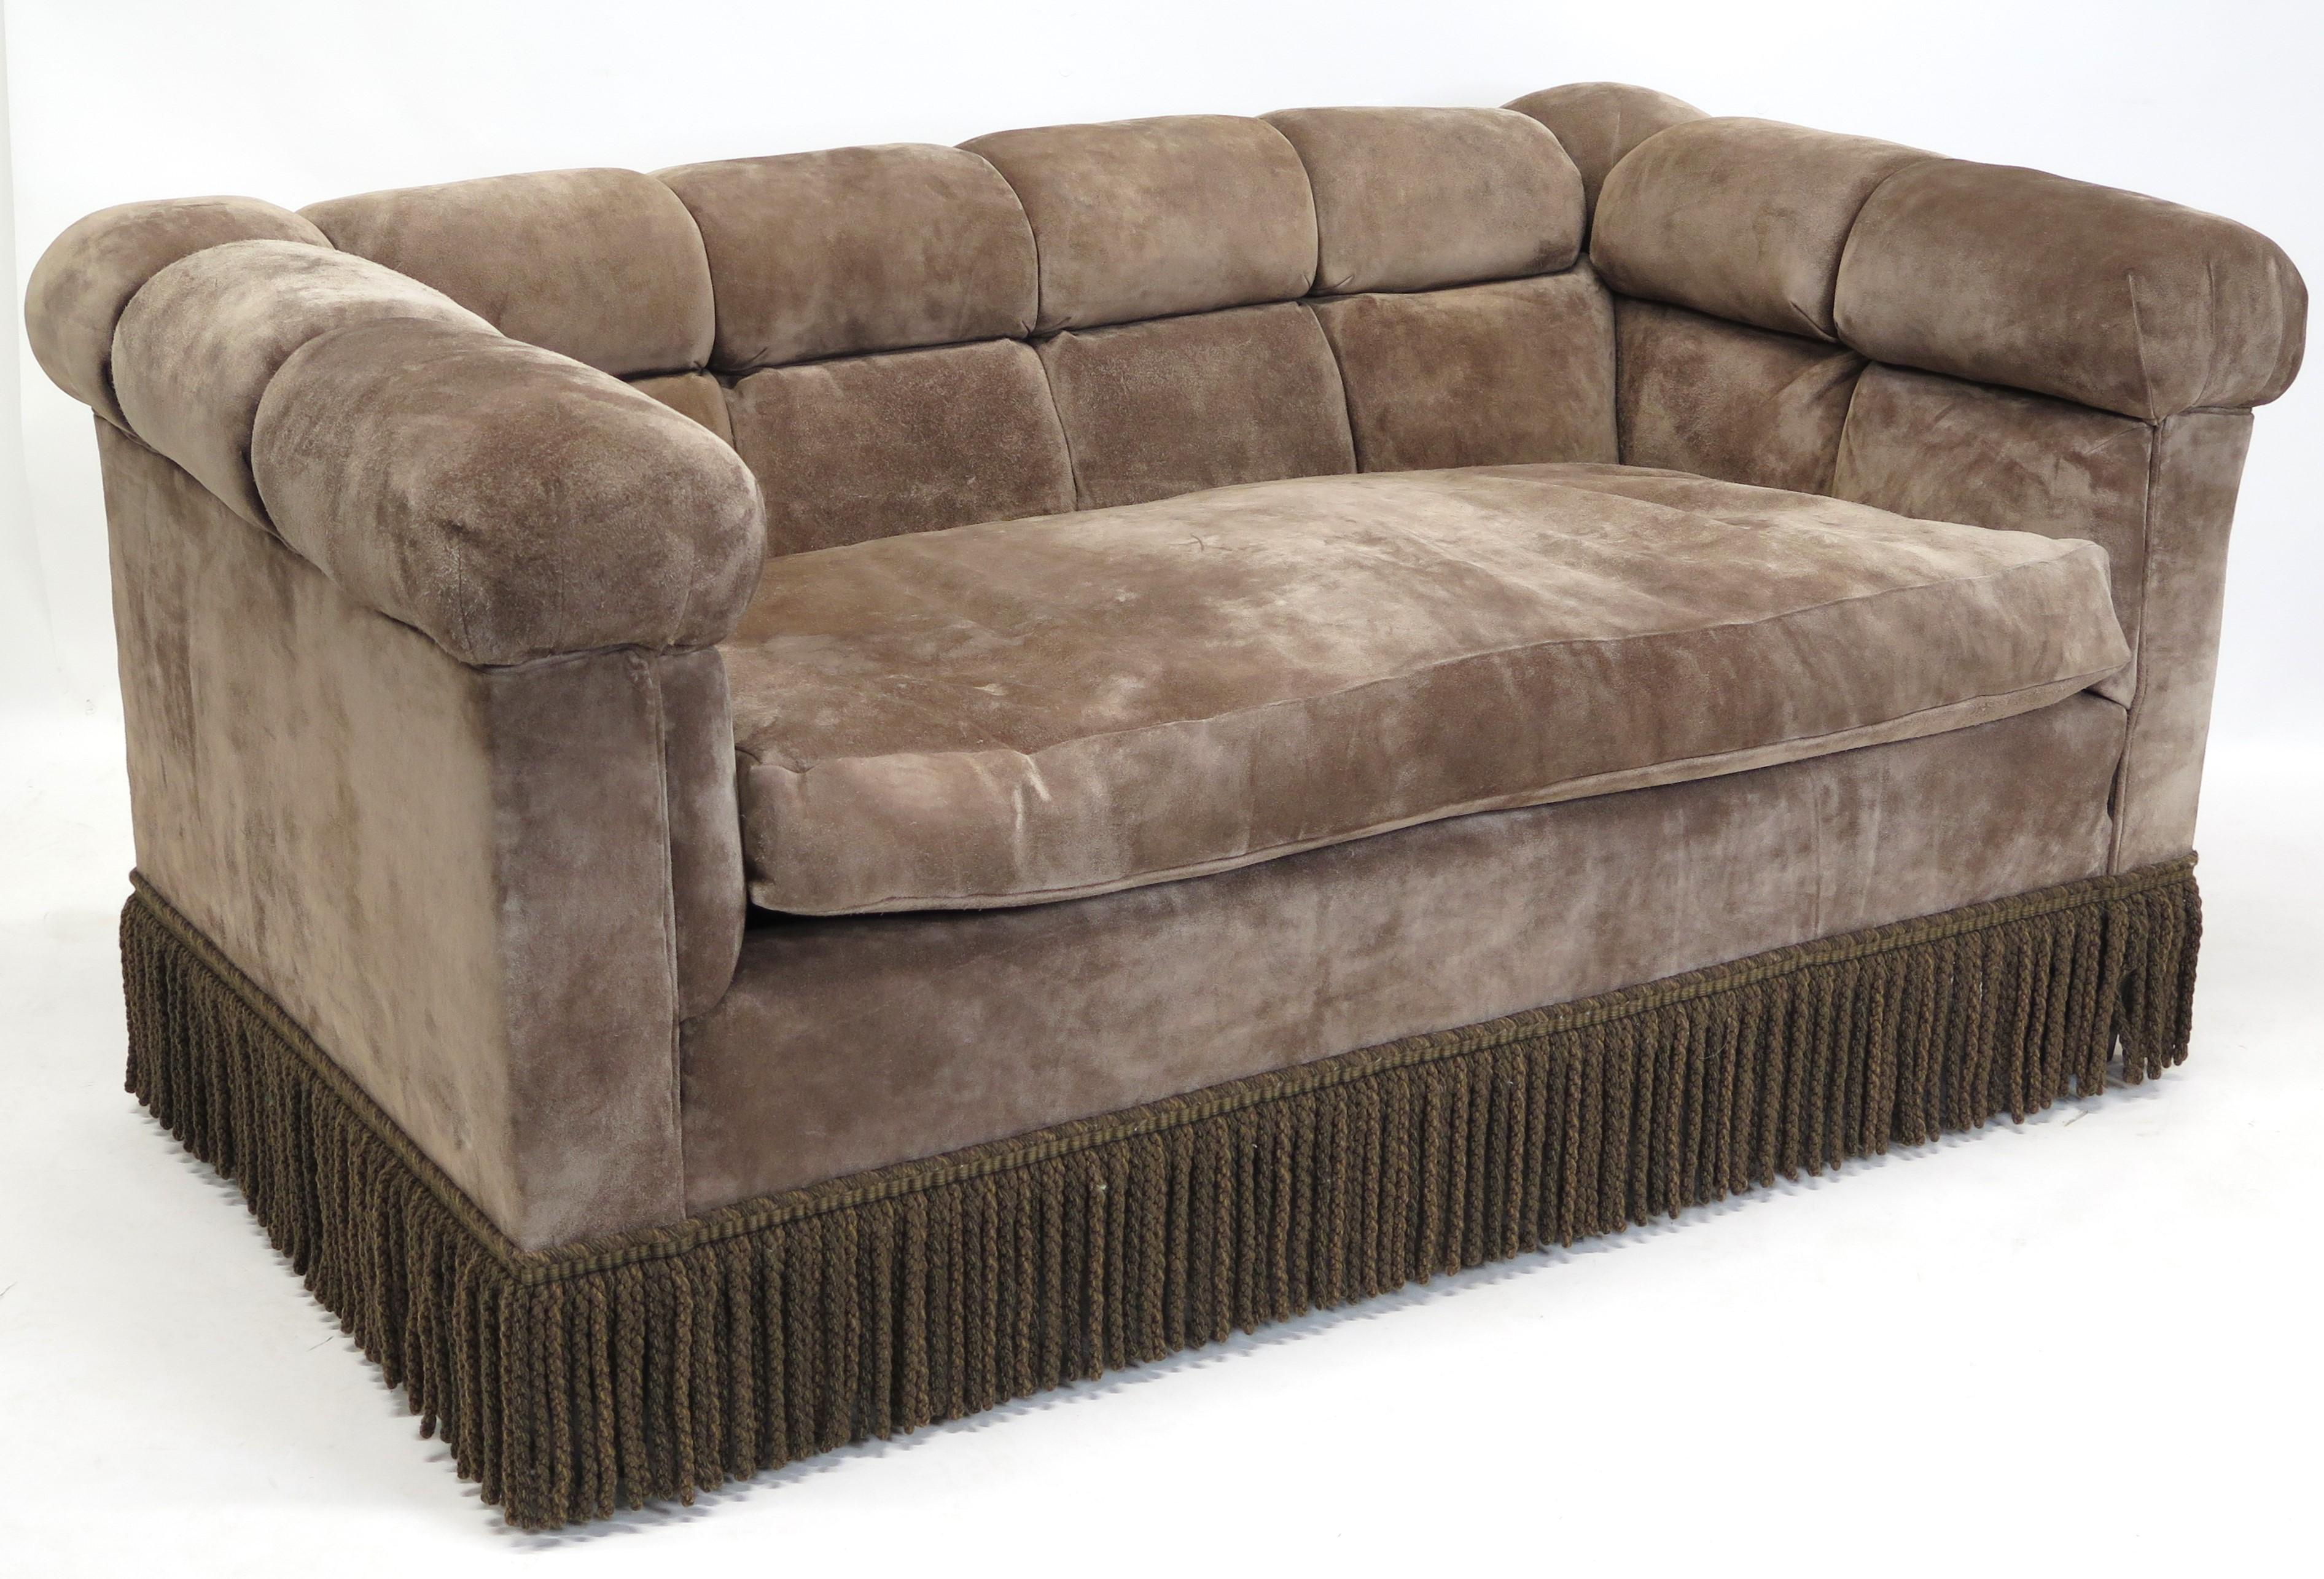 mid-century modern Dunbar Chesterfield sofa with brown suede button tufted upholstery and bullion fringe, single seat cushion, early 1960s 

the sofas, originally low to the floor, were raised as their owner got older, the bullion fringe was added